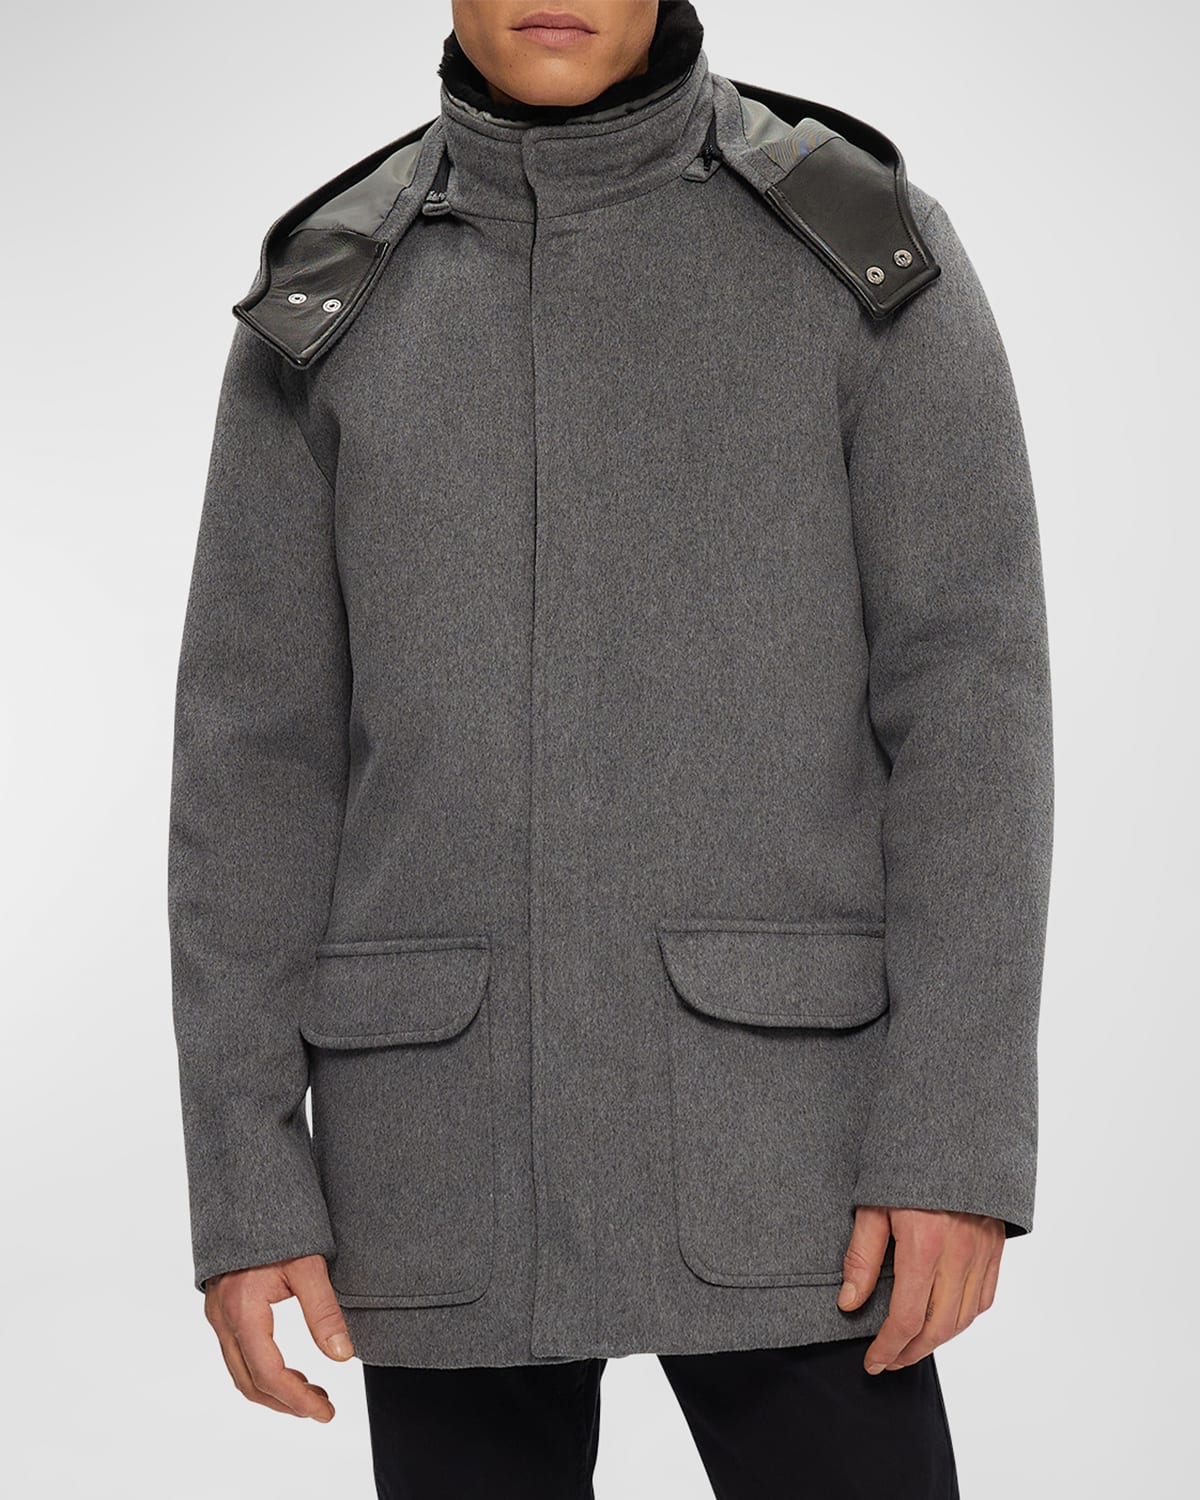 Gorski Mens Loro Piana Wool Parka With Leather Trim And Detachable Hood And Shearling Lamb Collar In Gray / Black